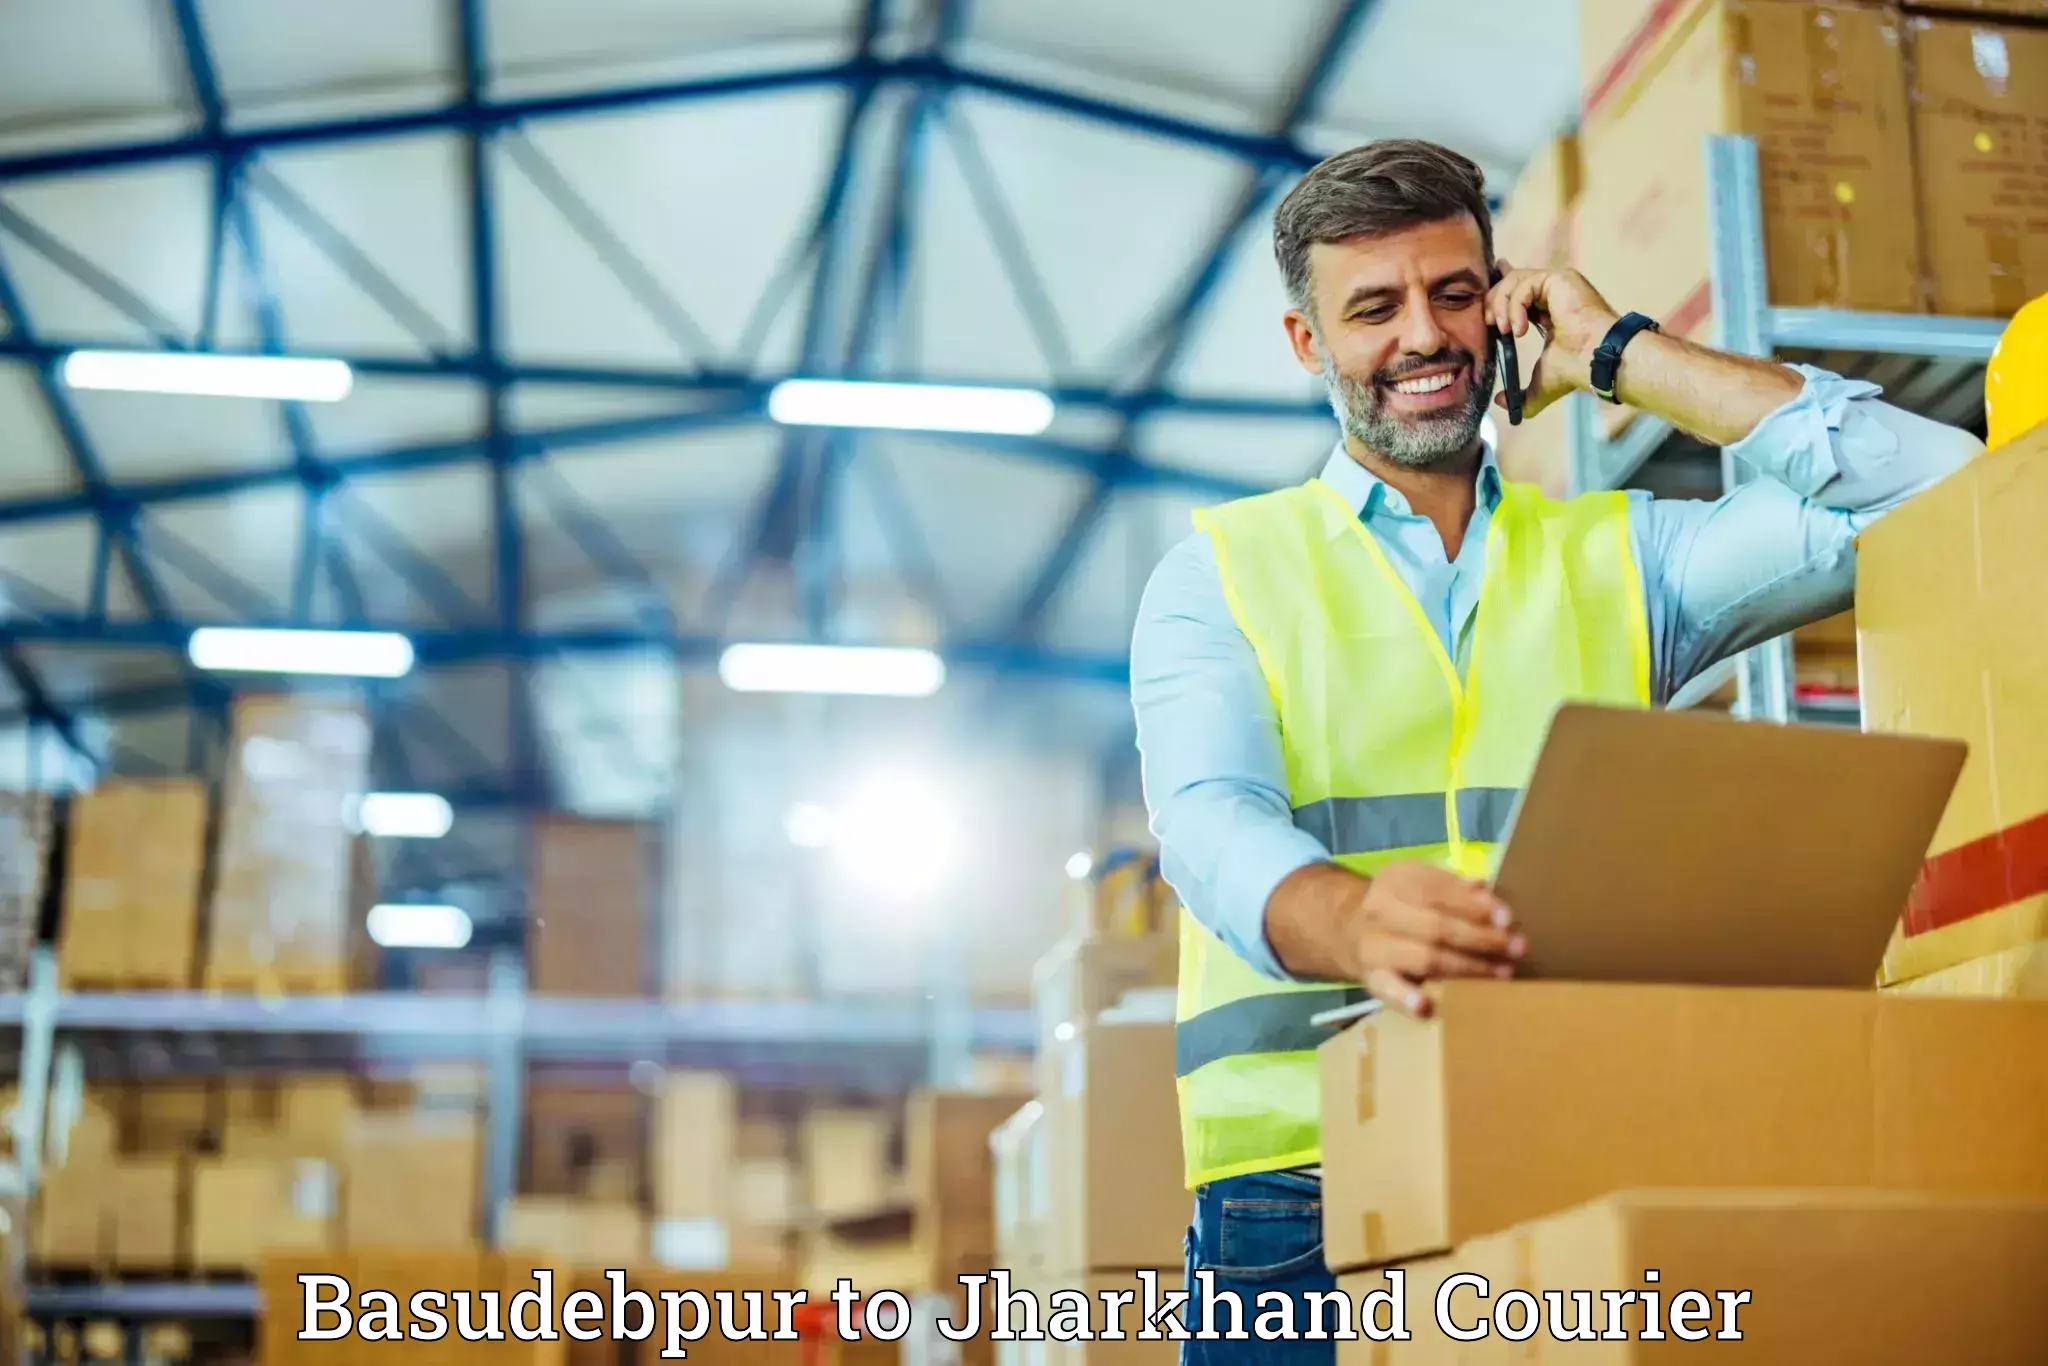 Furniture moving experts Basudebpur to Jharkhand